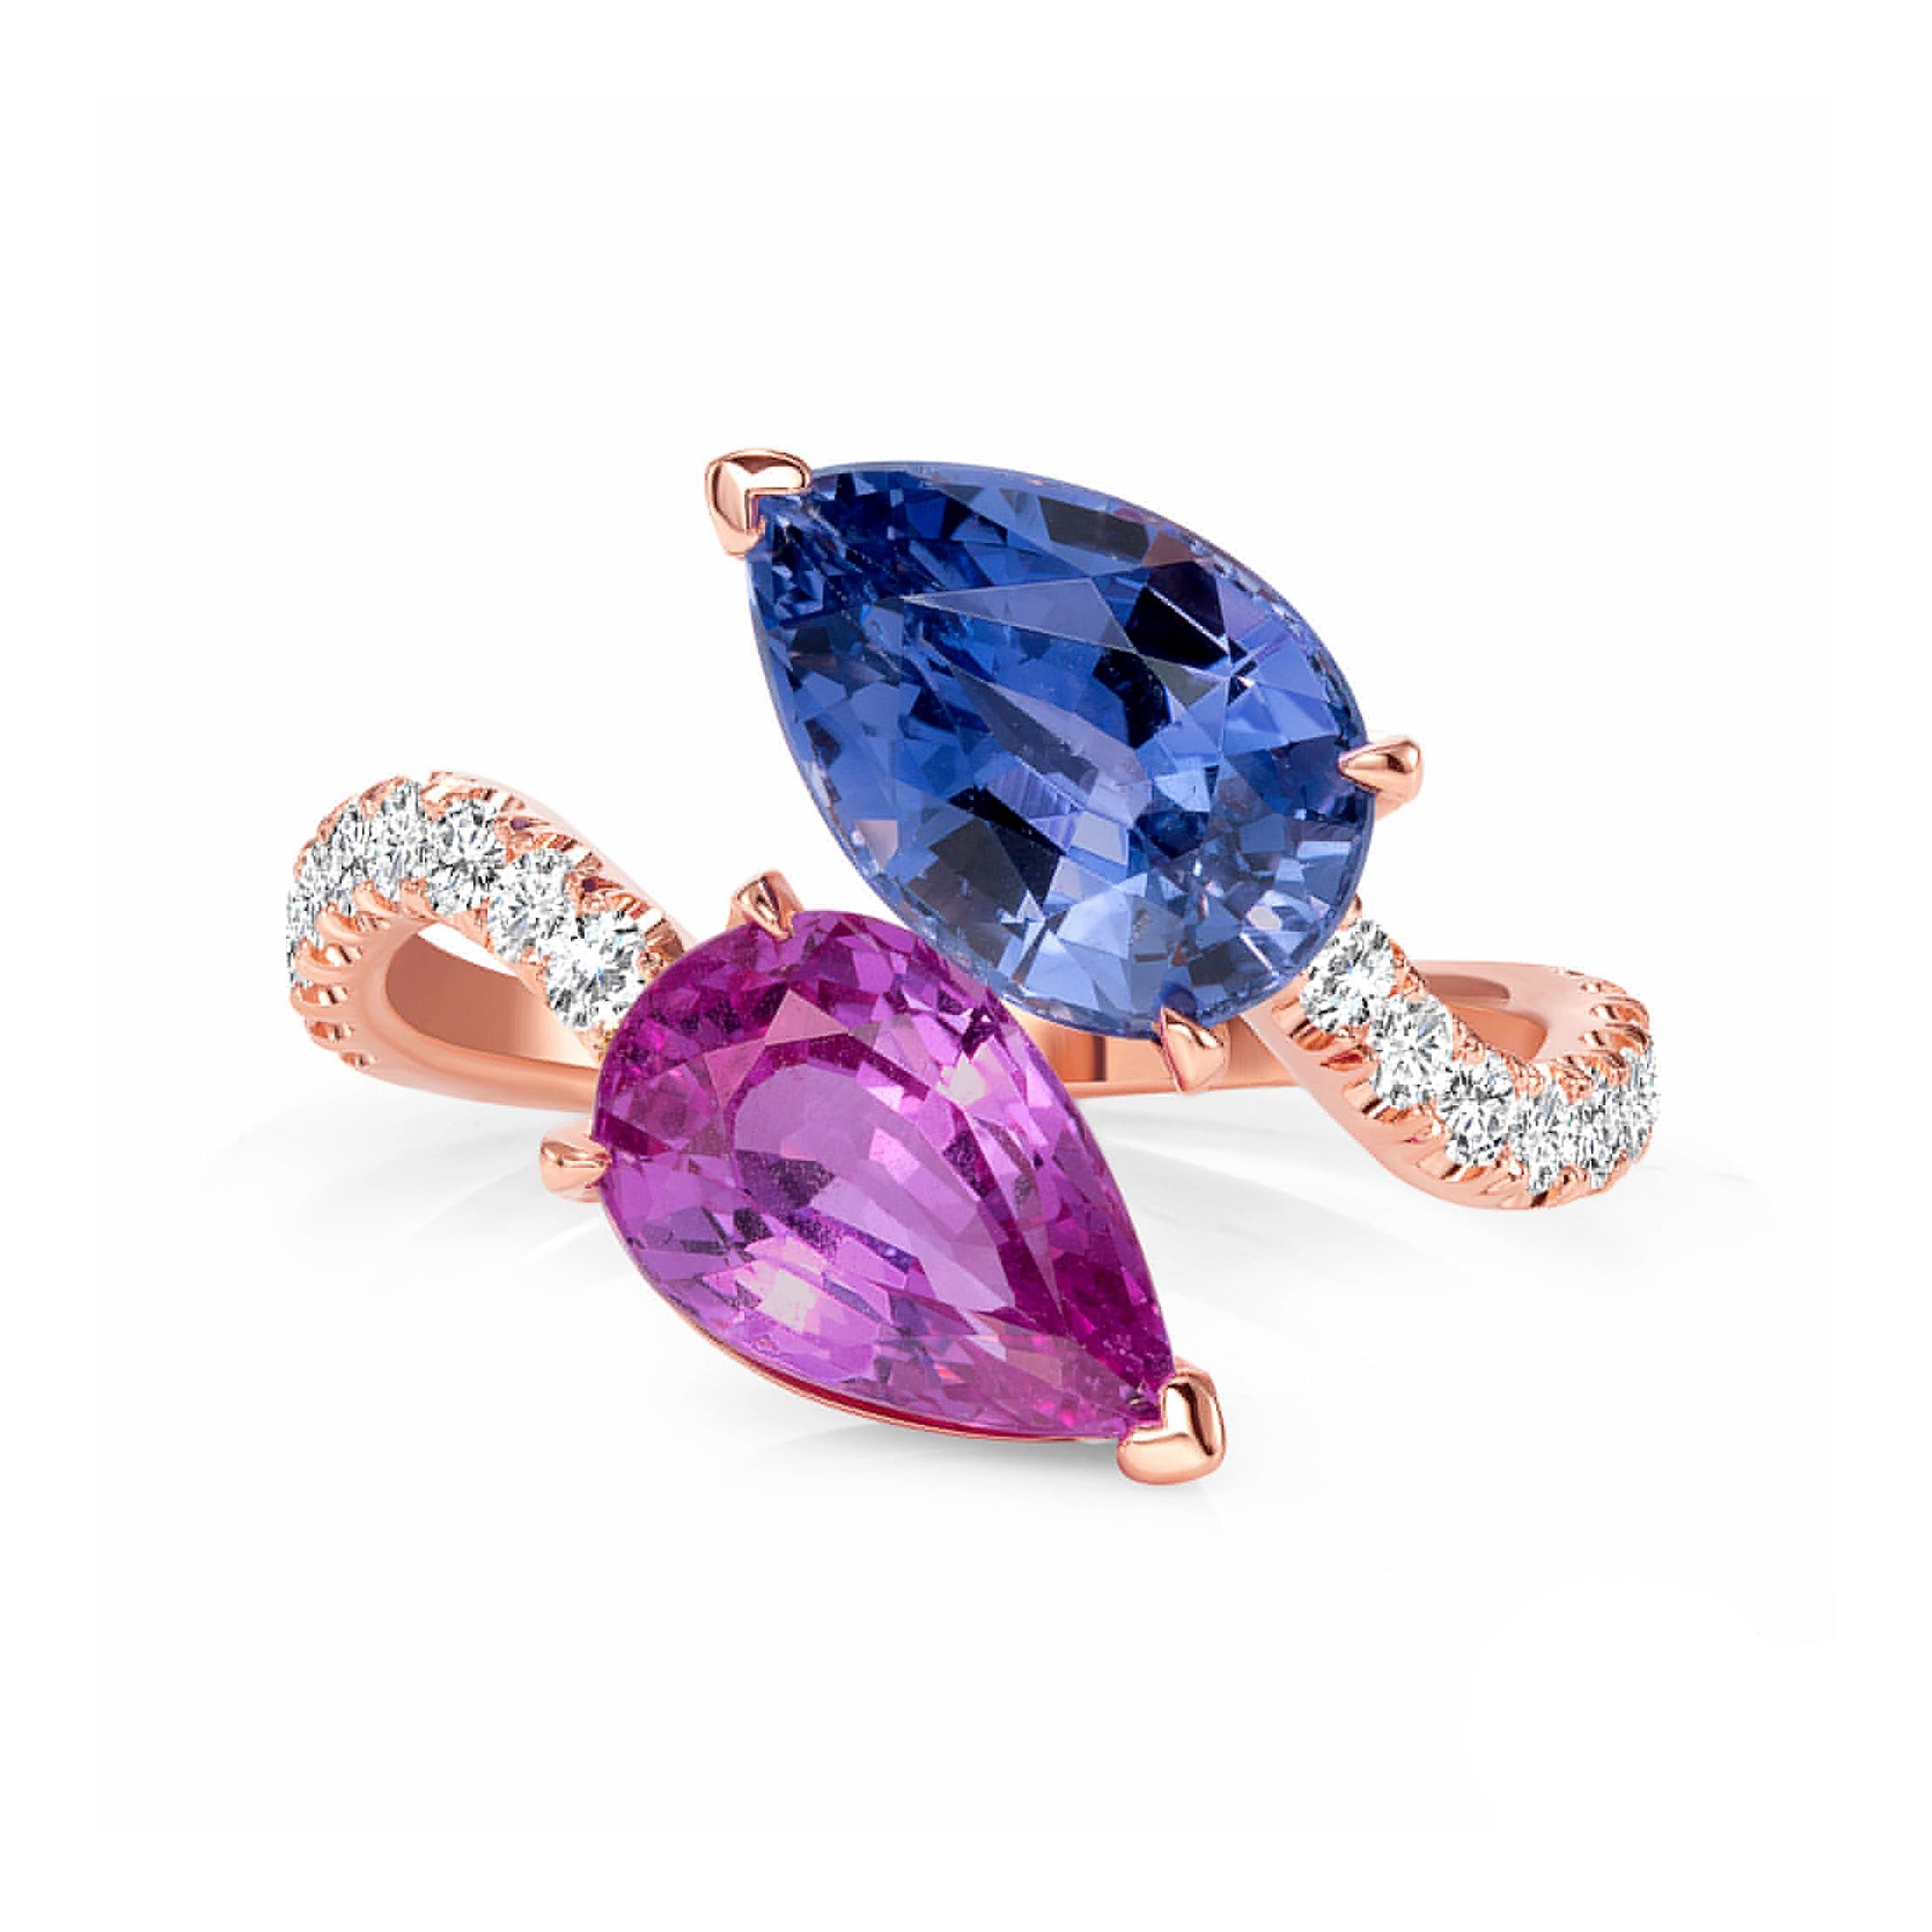 Blue Sapphire, Pink Sapphire and Diamond, 18k Rose Gold Ring - Talisman Collection Fine Jewelers